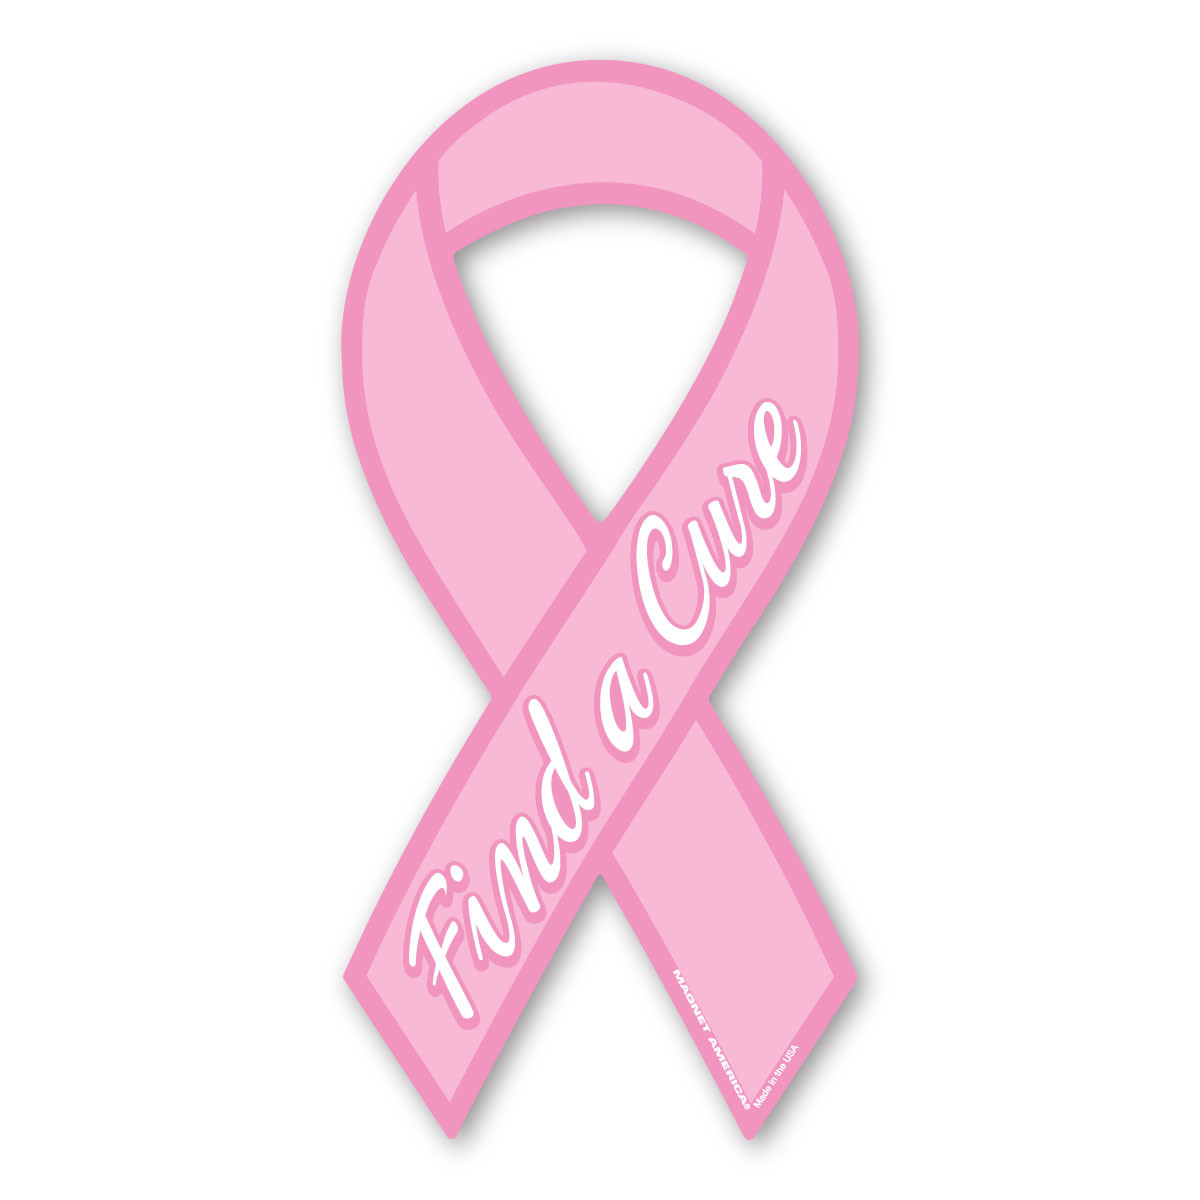 7" BONE CANCER Awareness Car Ribbon Magnet support find a cure 